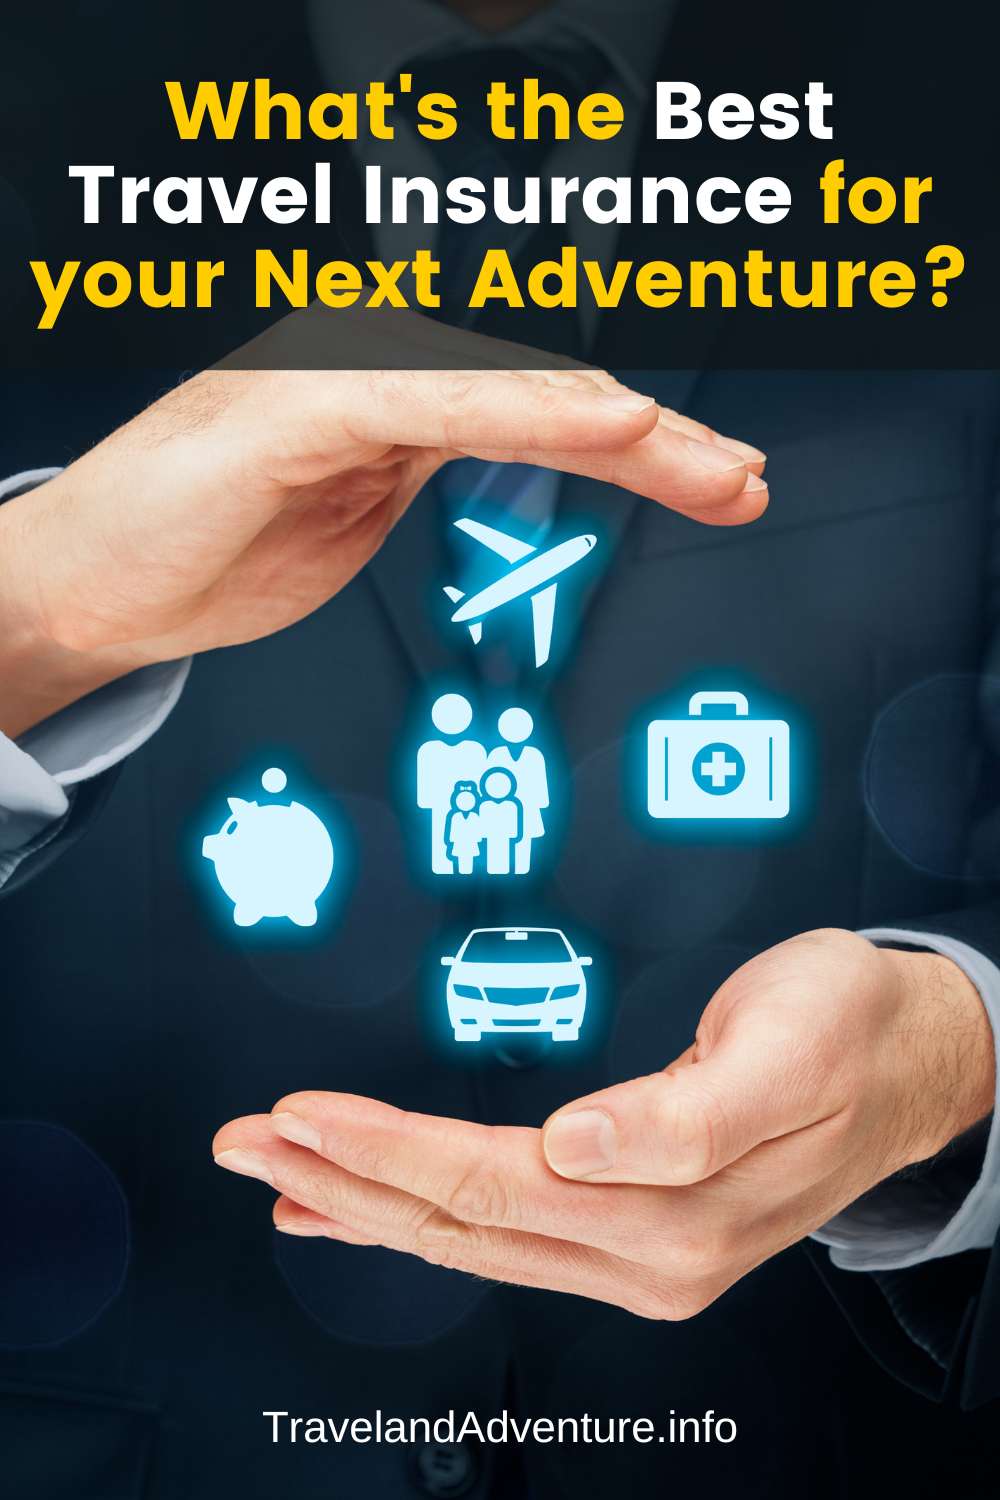 Which is the Best Travel Insurance for your Next Adventure